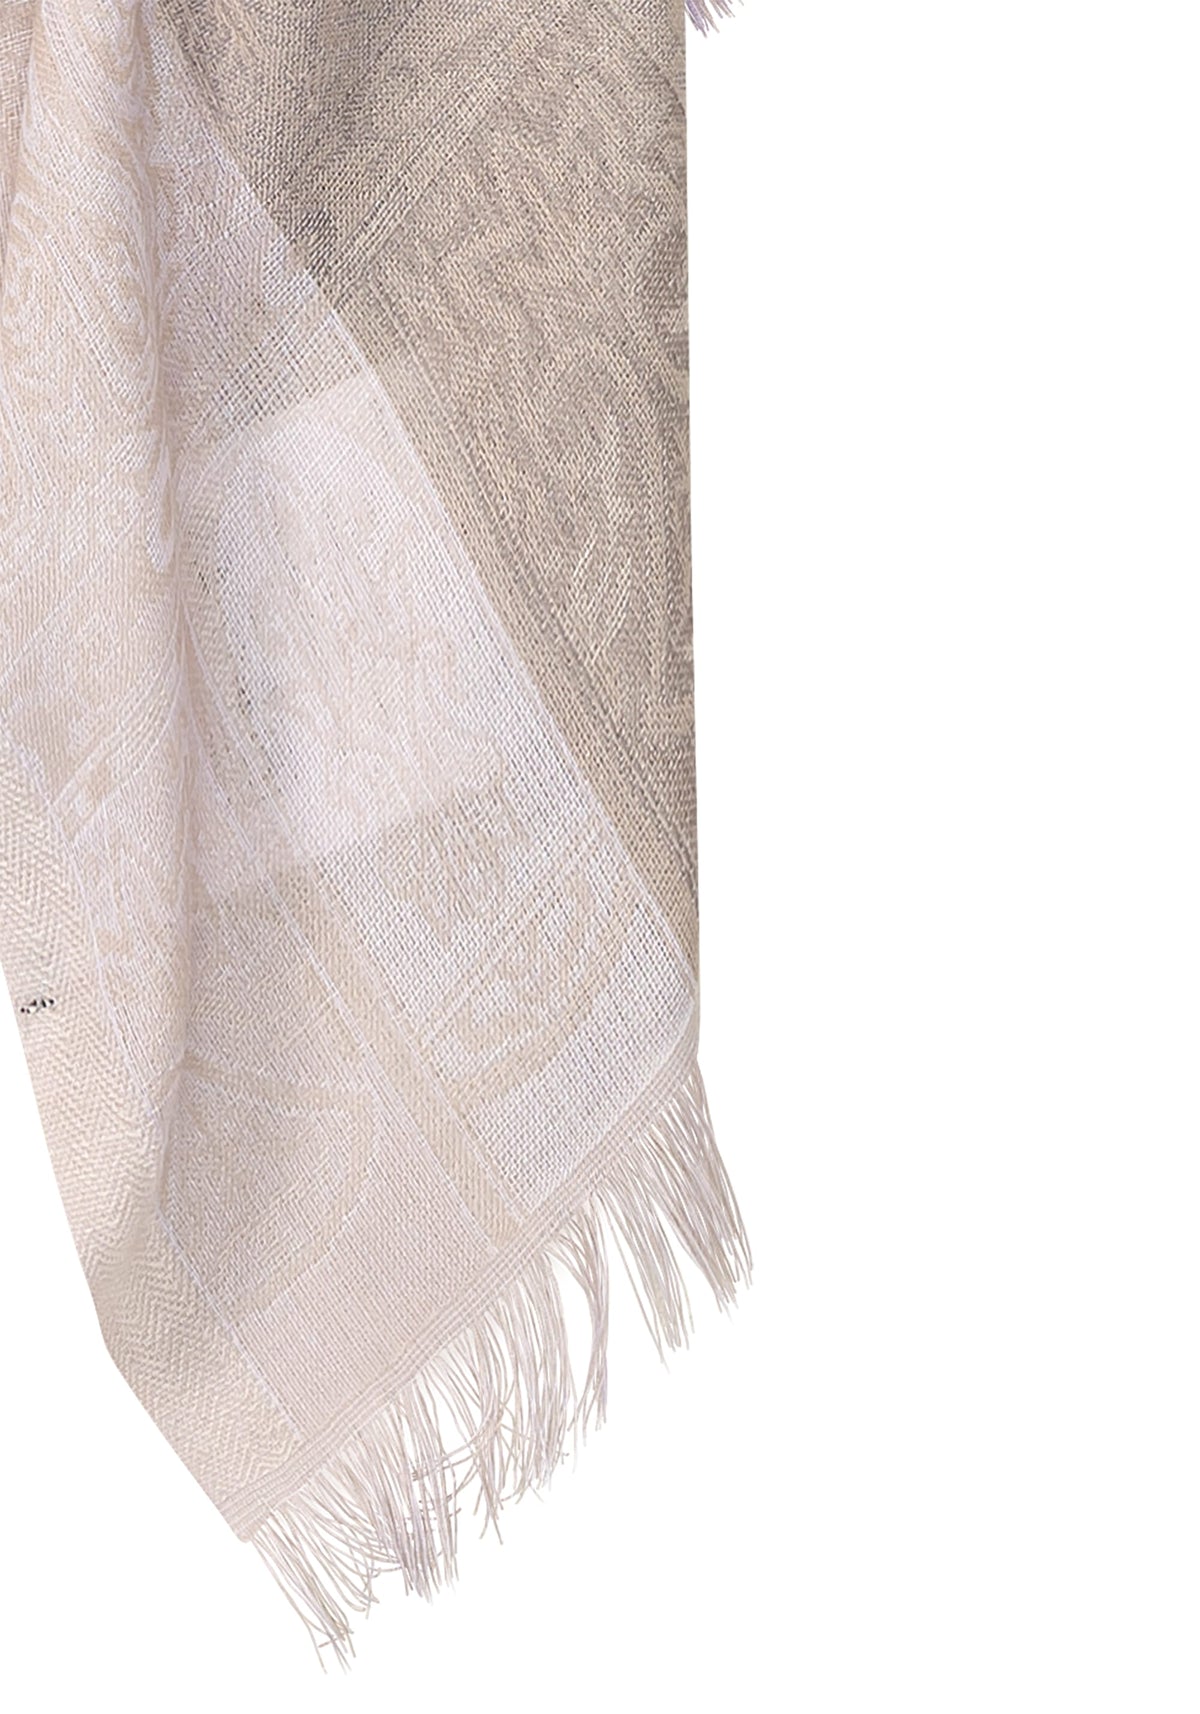 Woven Paisley Mid-Size Scarf with Frayed Edge Trim